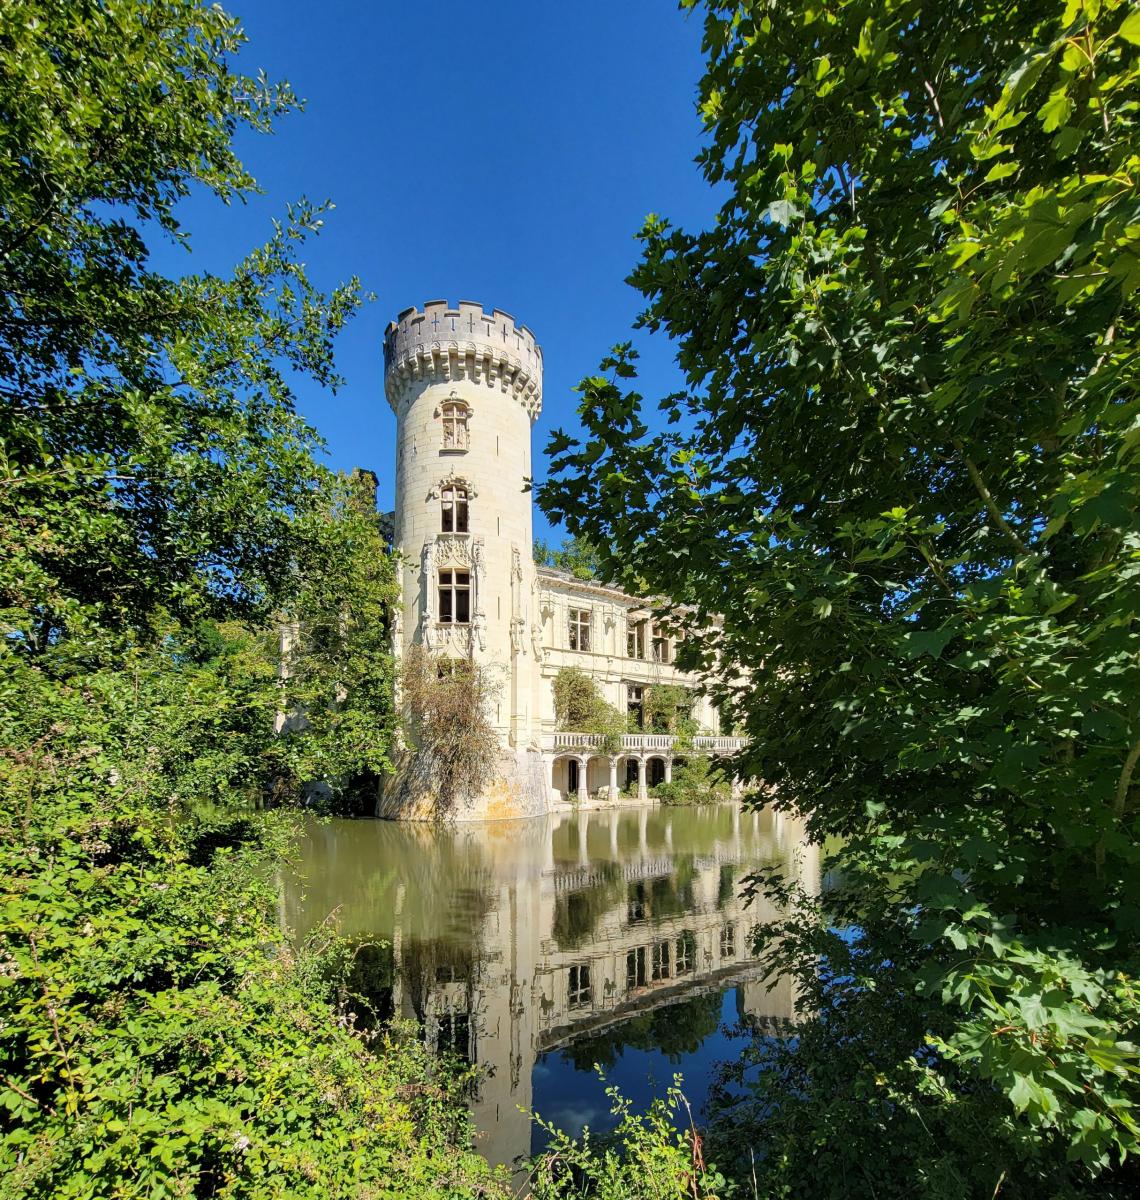 CHÂTEAU DE LA MOTHE CHANDENIERS is a truly timeless place. Located in the Loire Valley in France, it is a romantic and mysterious masterpiece that fell into ruin after a devastating fire in the early 20th century.